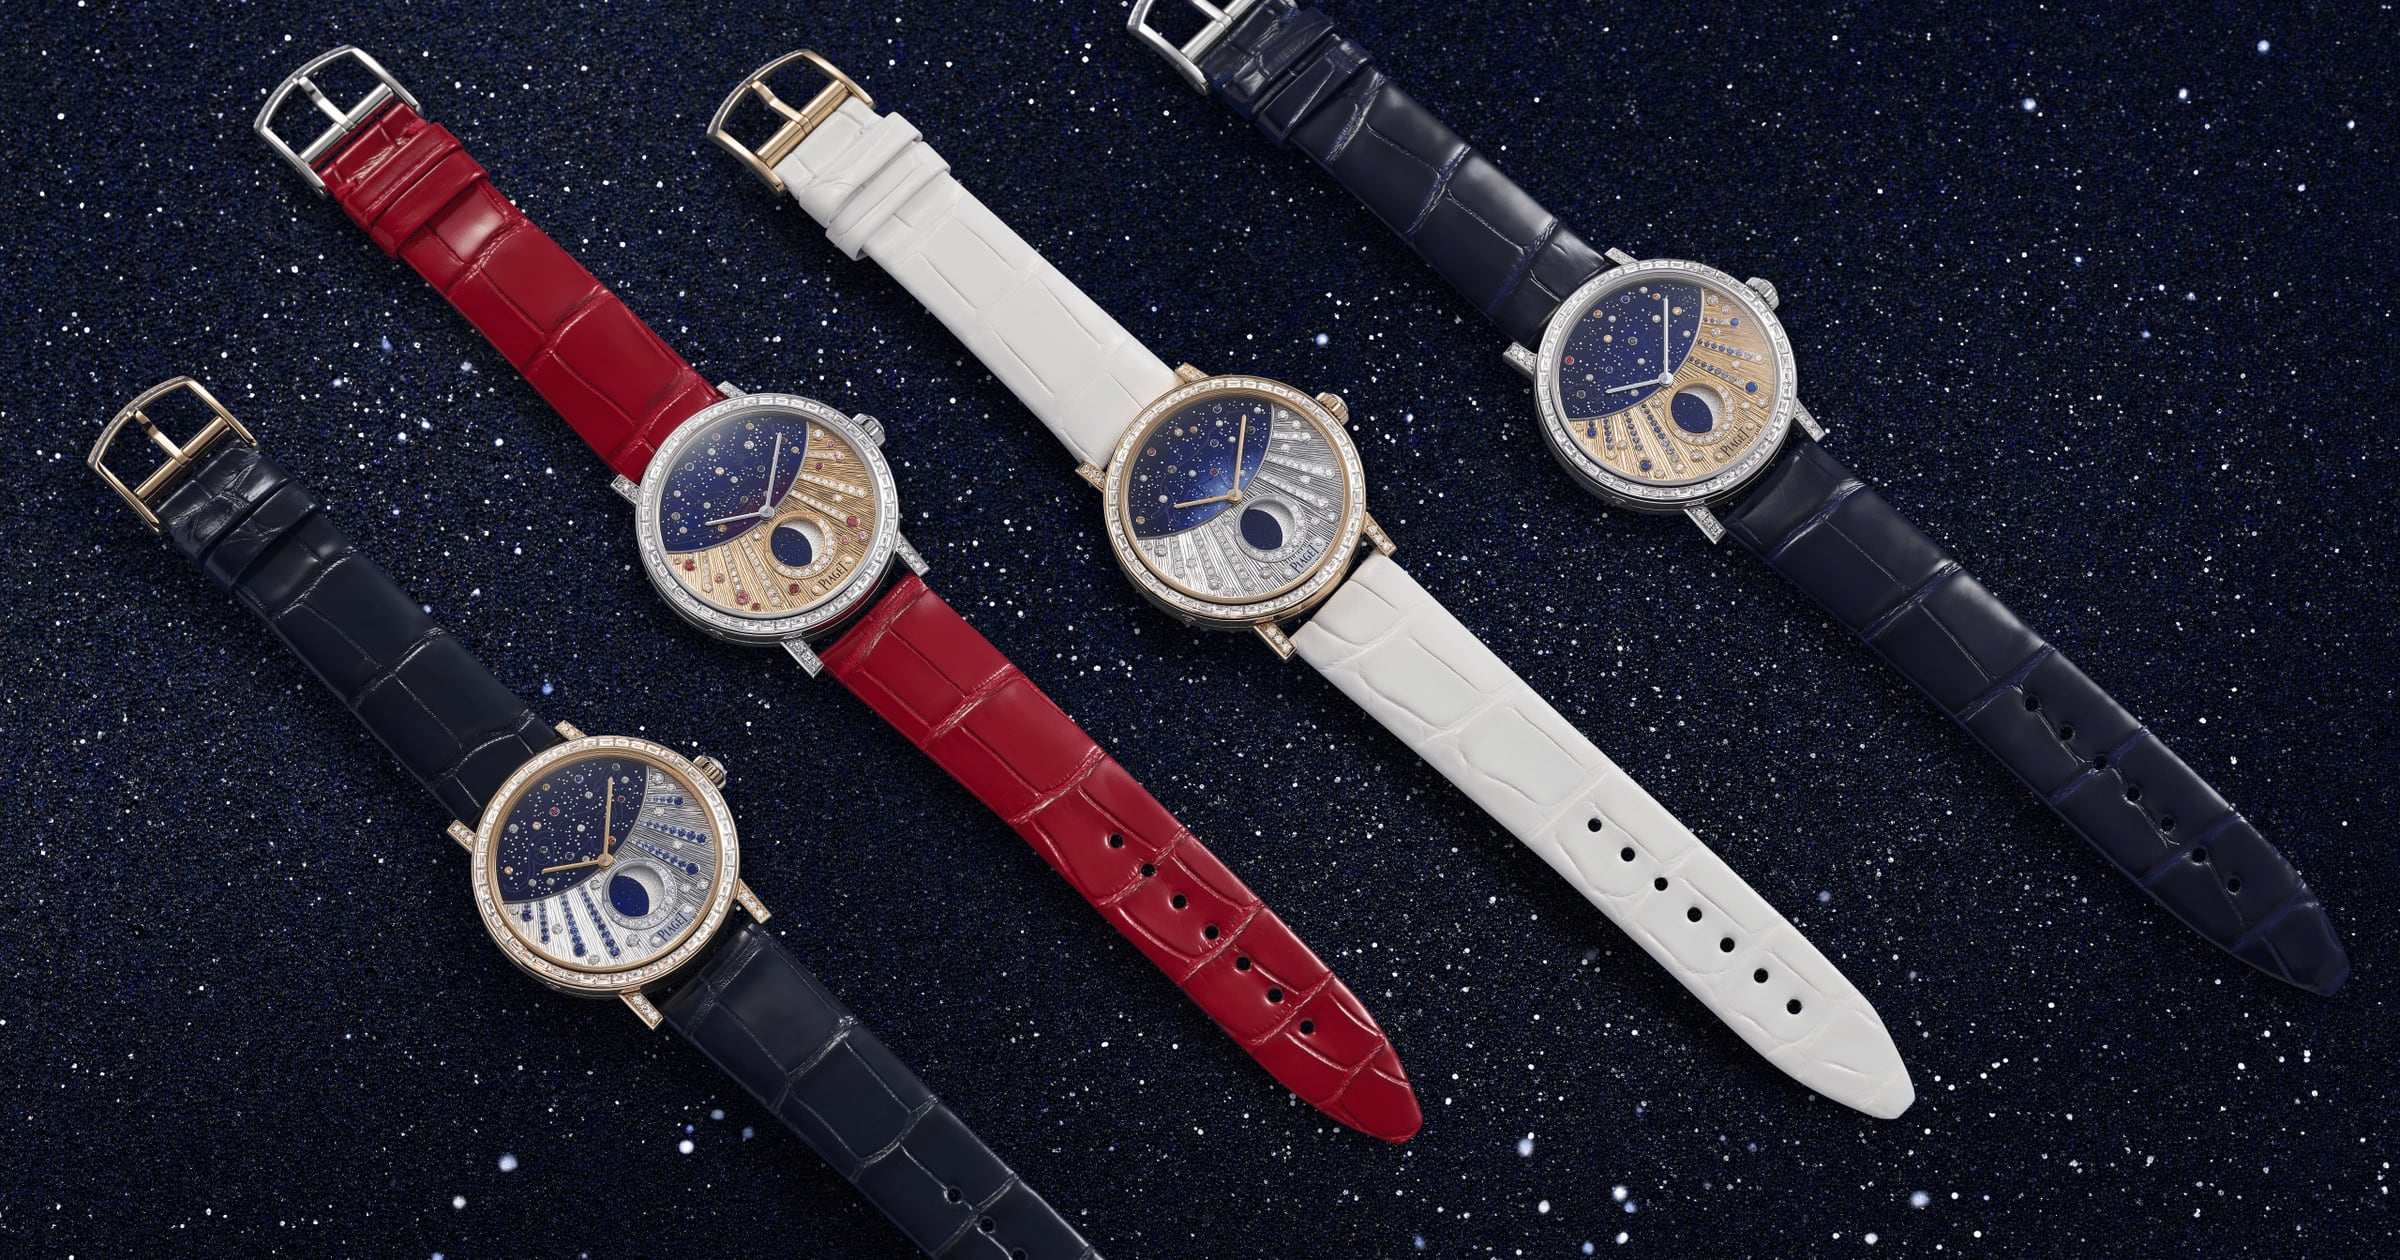 Ten new watches that shoot for the moon